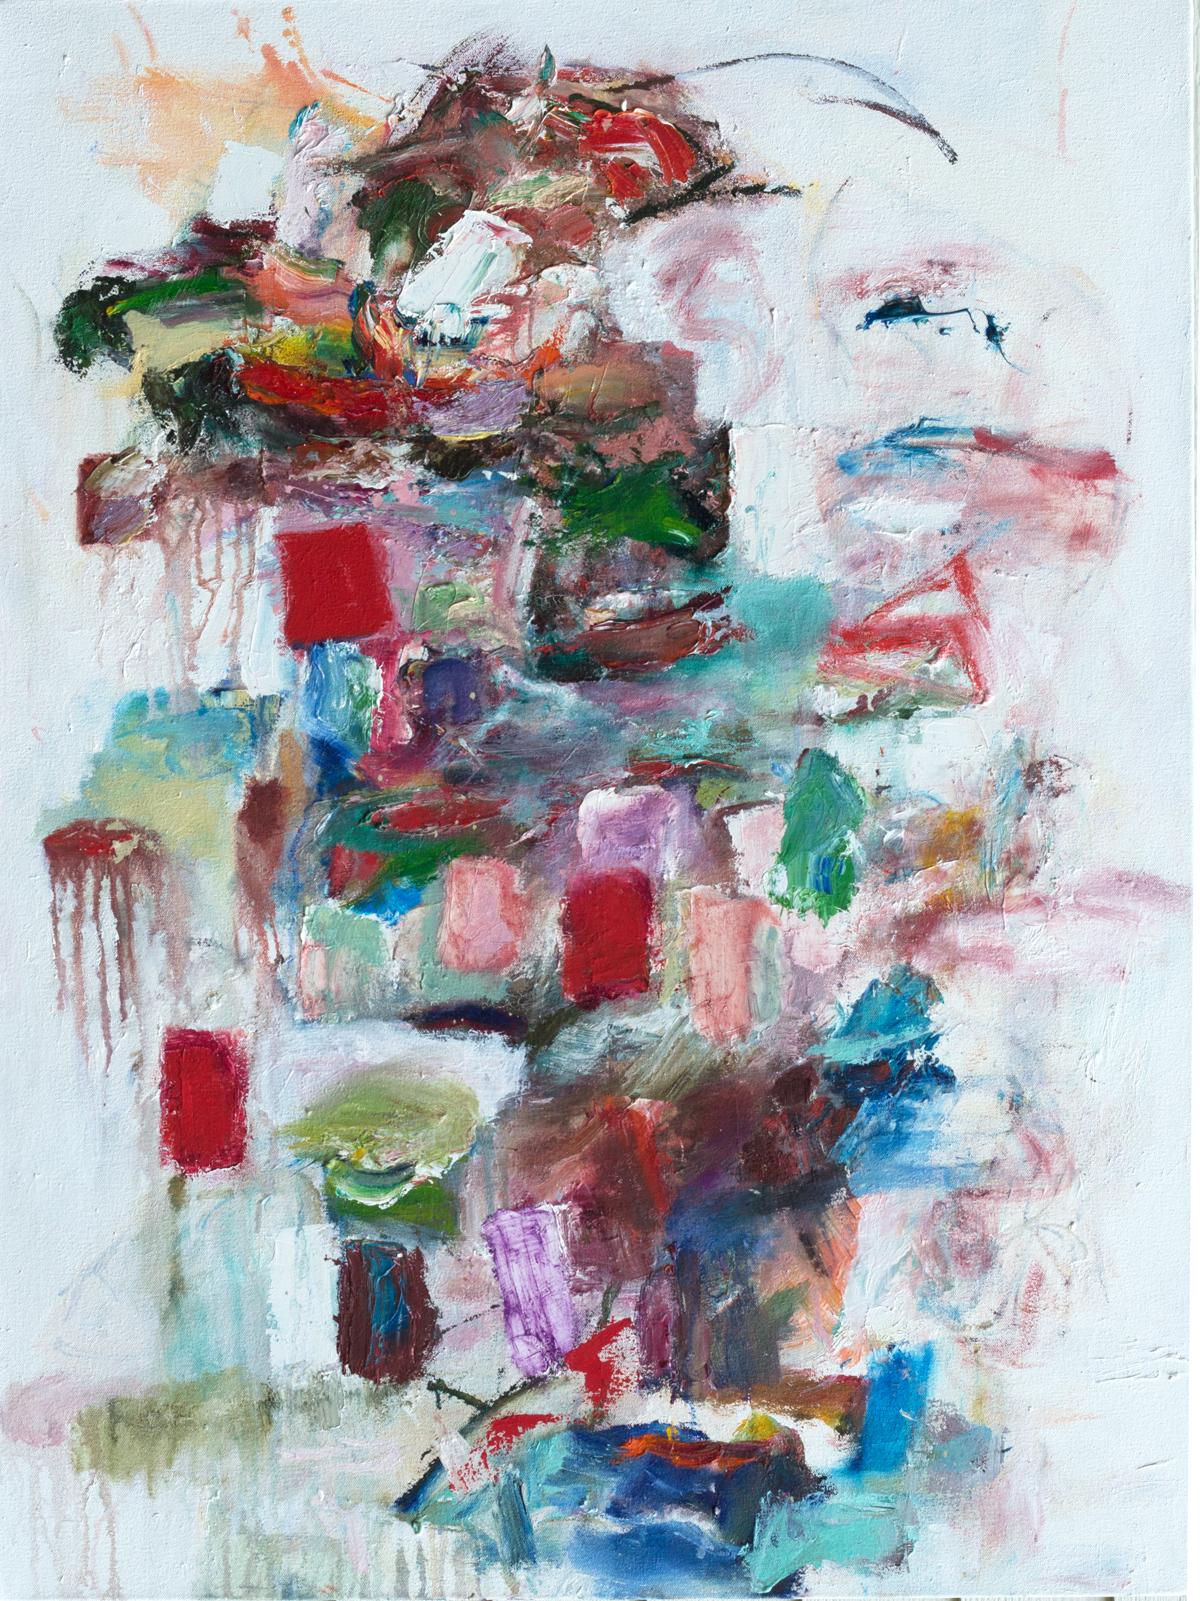 "Building Promises", abstract, blue, red, green, pink, purple, oil painting - Painting by Katherine Borkowski-Byrne